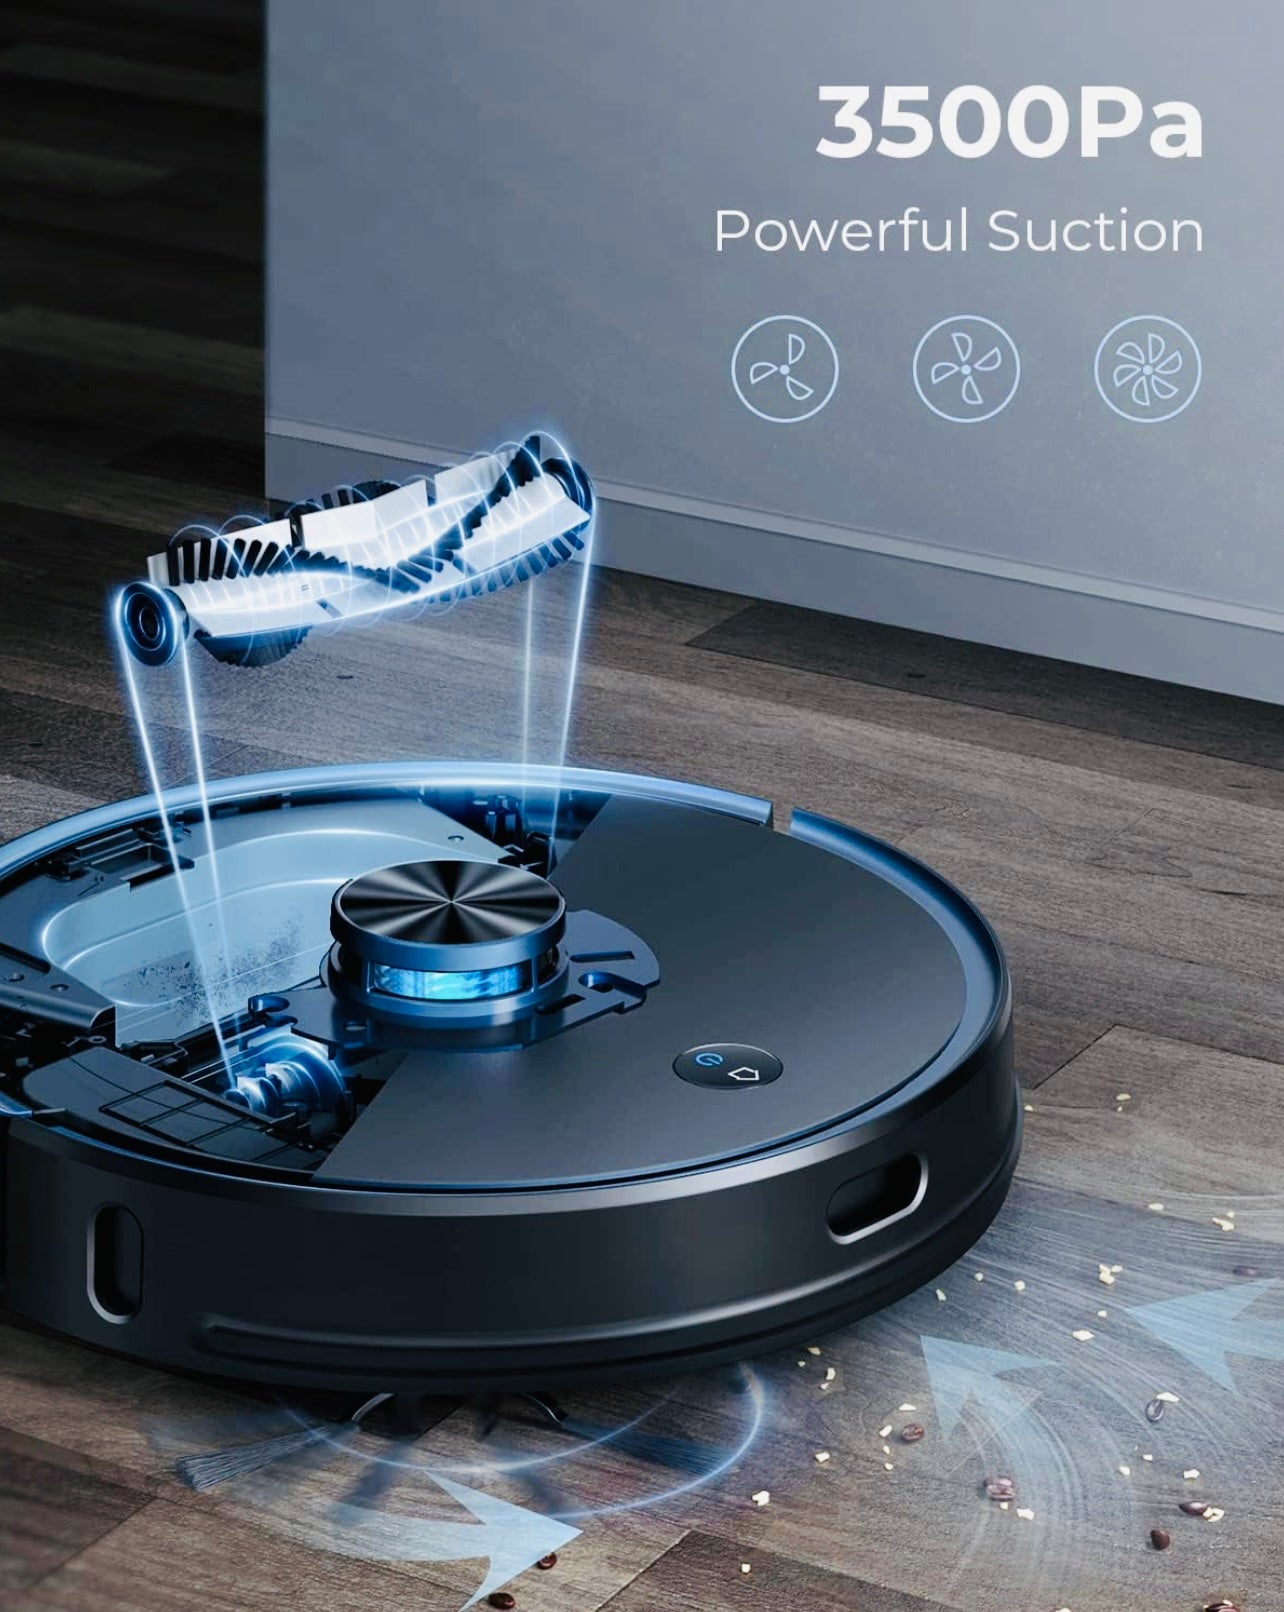 Laresar Robot Vacuum Cleaner with Mop,3500Pa Robotic Vacuum with 3.5L Self Emptying Station,Works with Alexa,Editable Map,Lidar Navigation,3 In 1,Robot Hoover for Pet Hair,Smart App Control(L6 Pro)